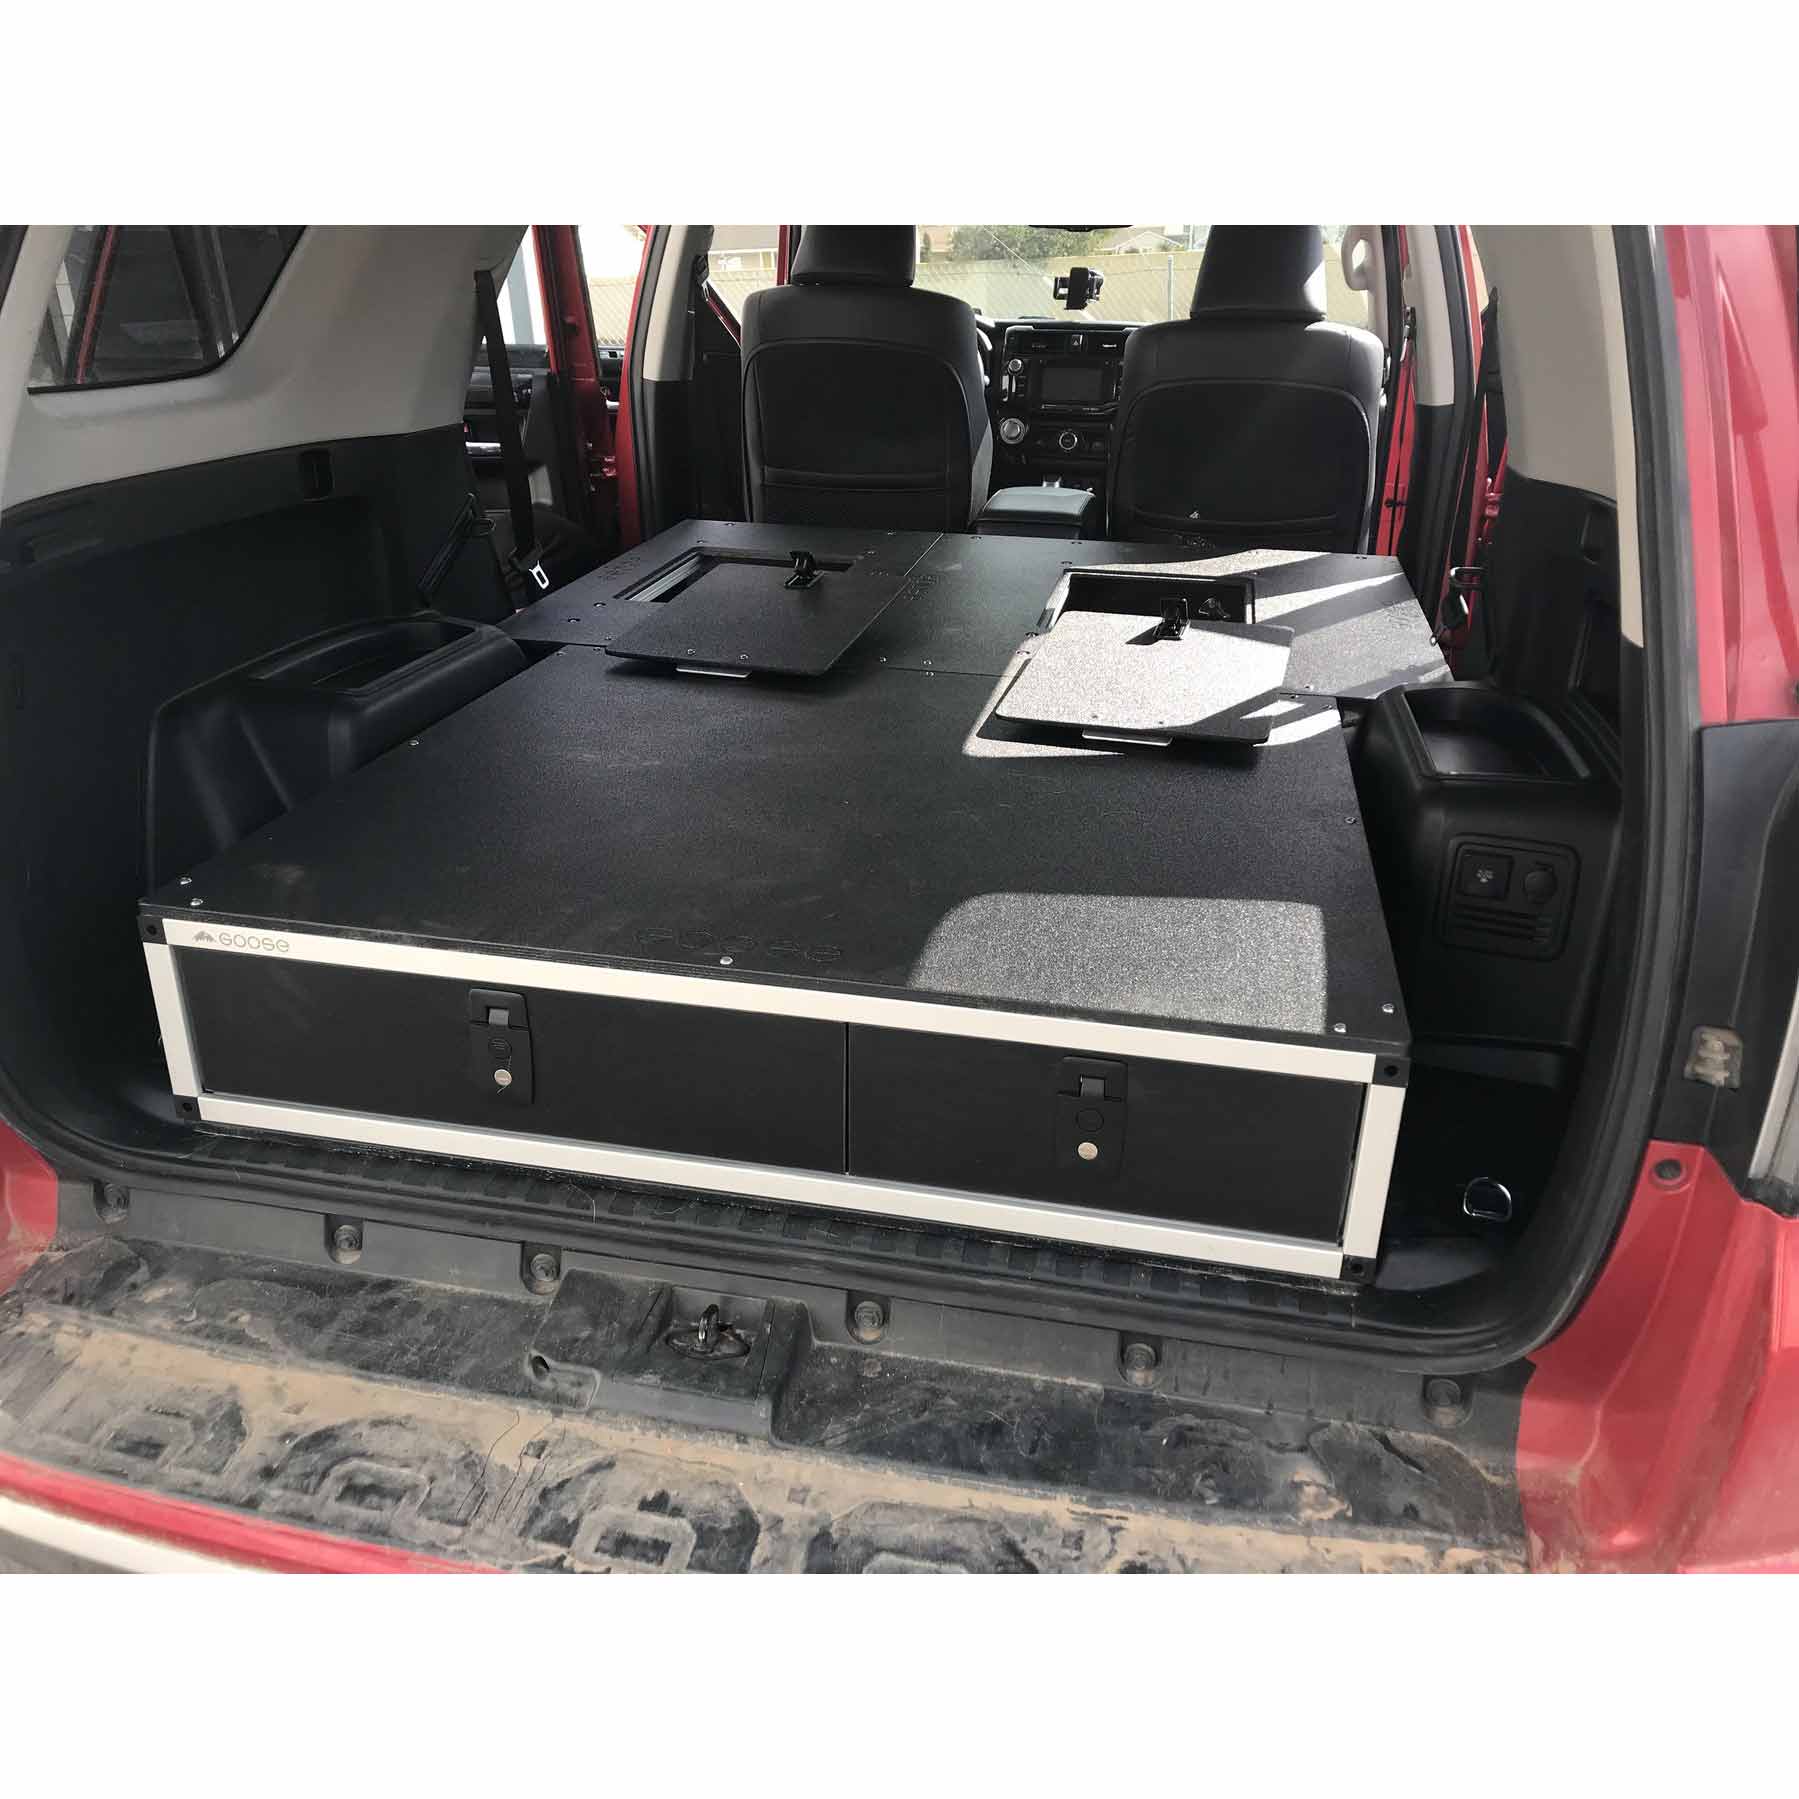 Goose Gear - Stealth Sleep & Storage Package w/ Fitted Top Plate - Toyota 4Runner (2010-Present)